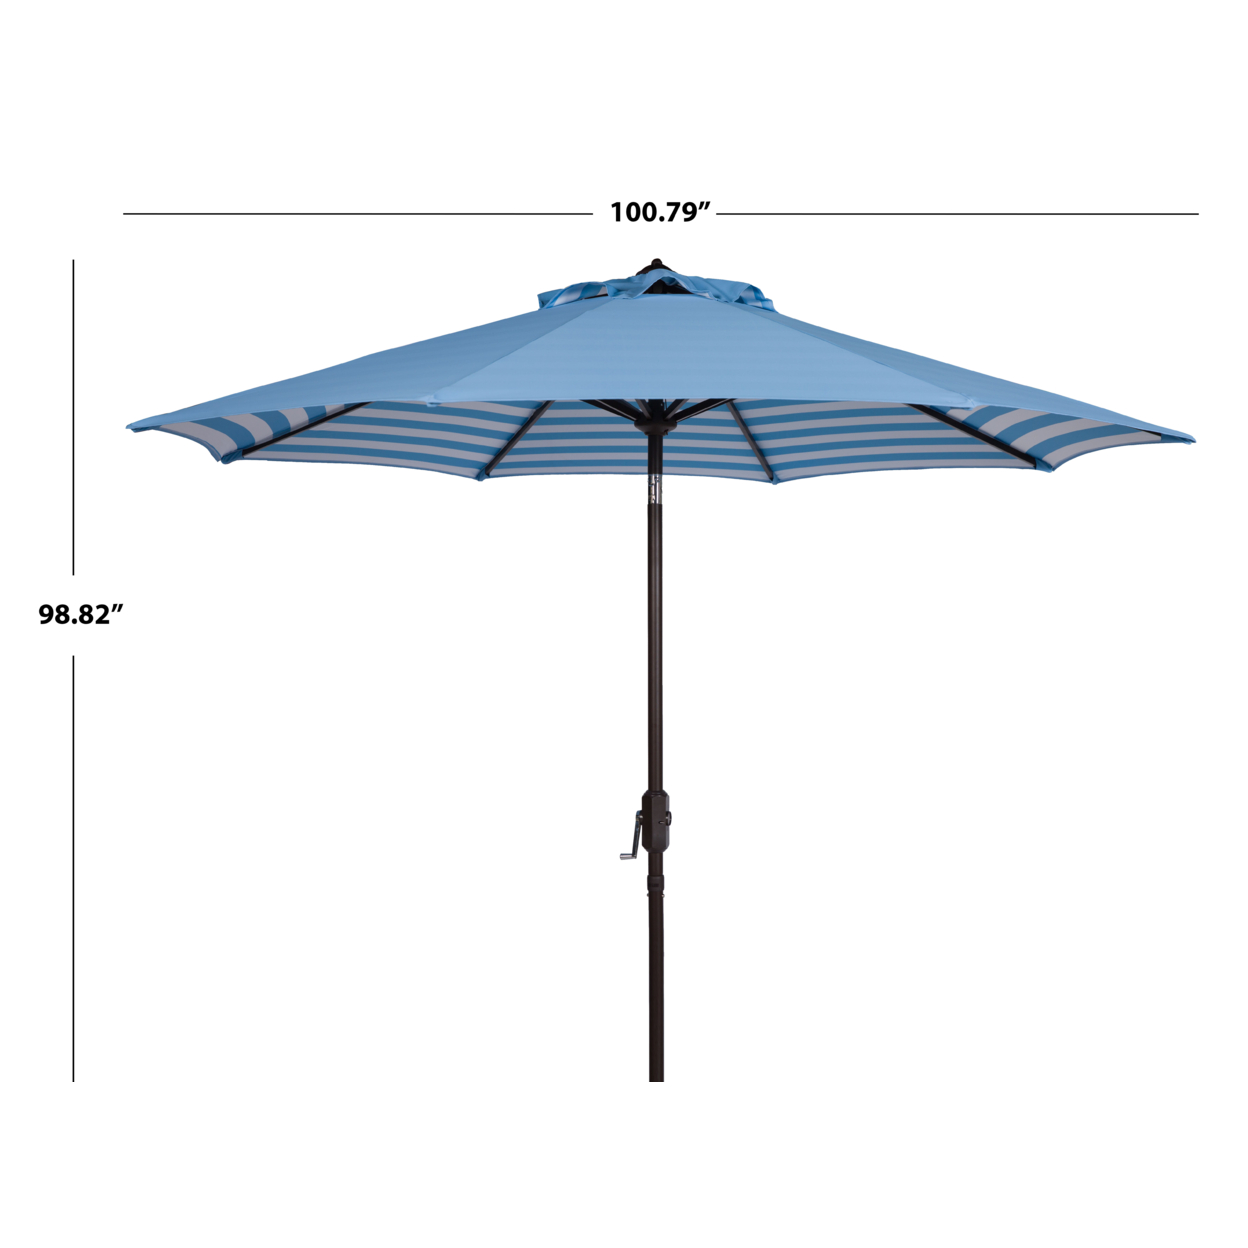 SAFAVIEH Outdoor Collection Athens Inside Out Striped 9-Foot Umbrella Baby Blue / White